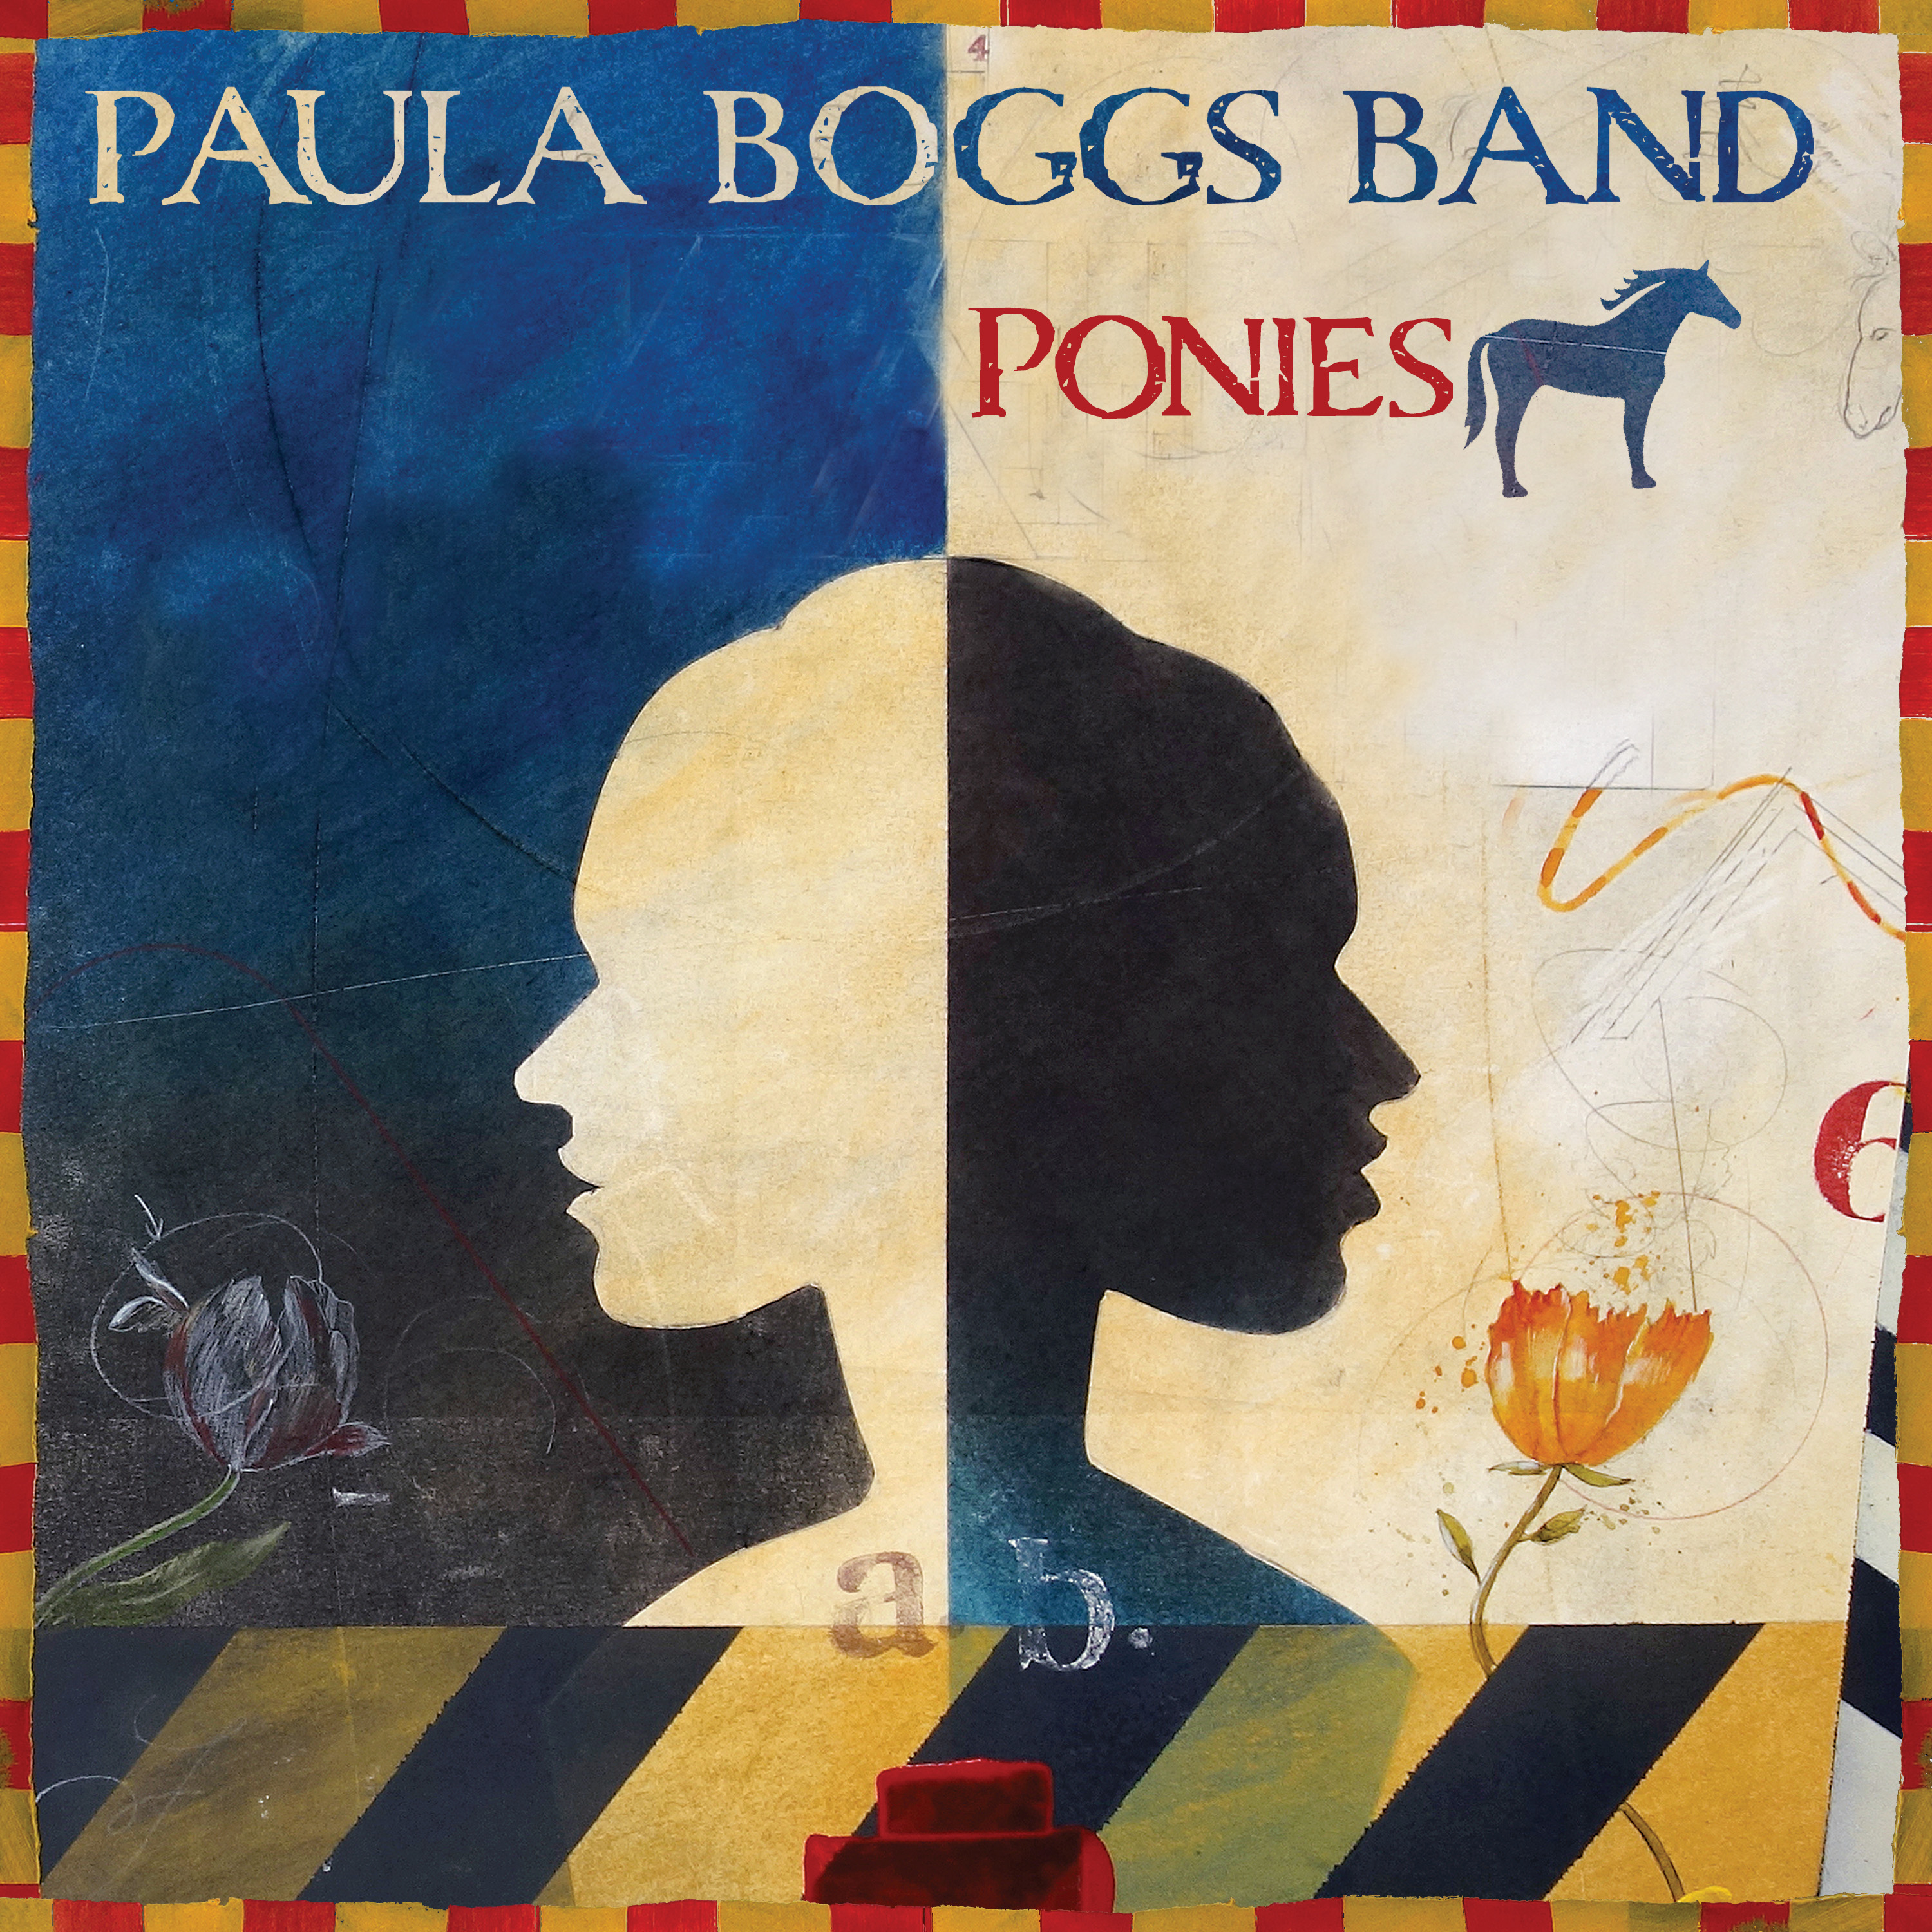 4 Entertainment Artist Paula Boggs Band Premieres Official Ponies Video Globally On Americana UK